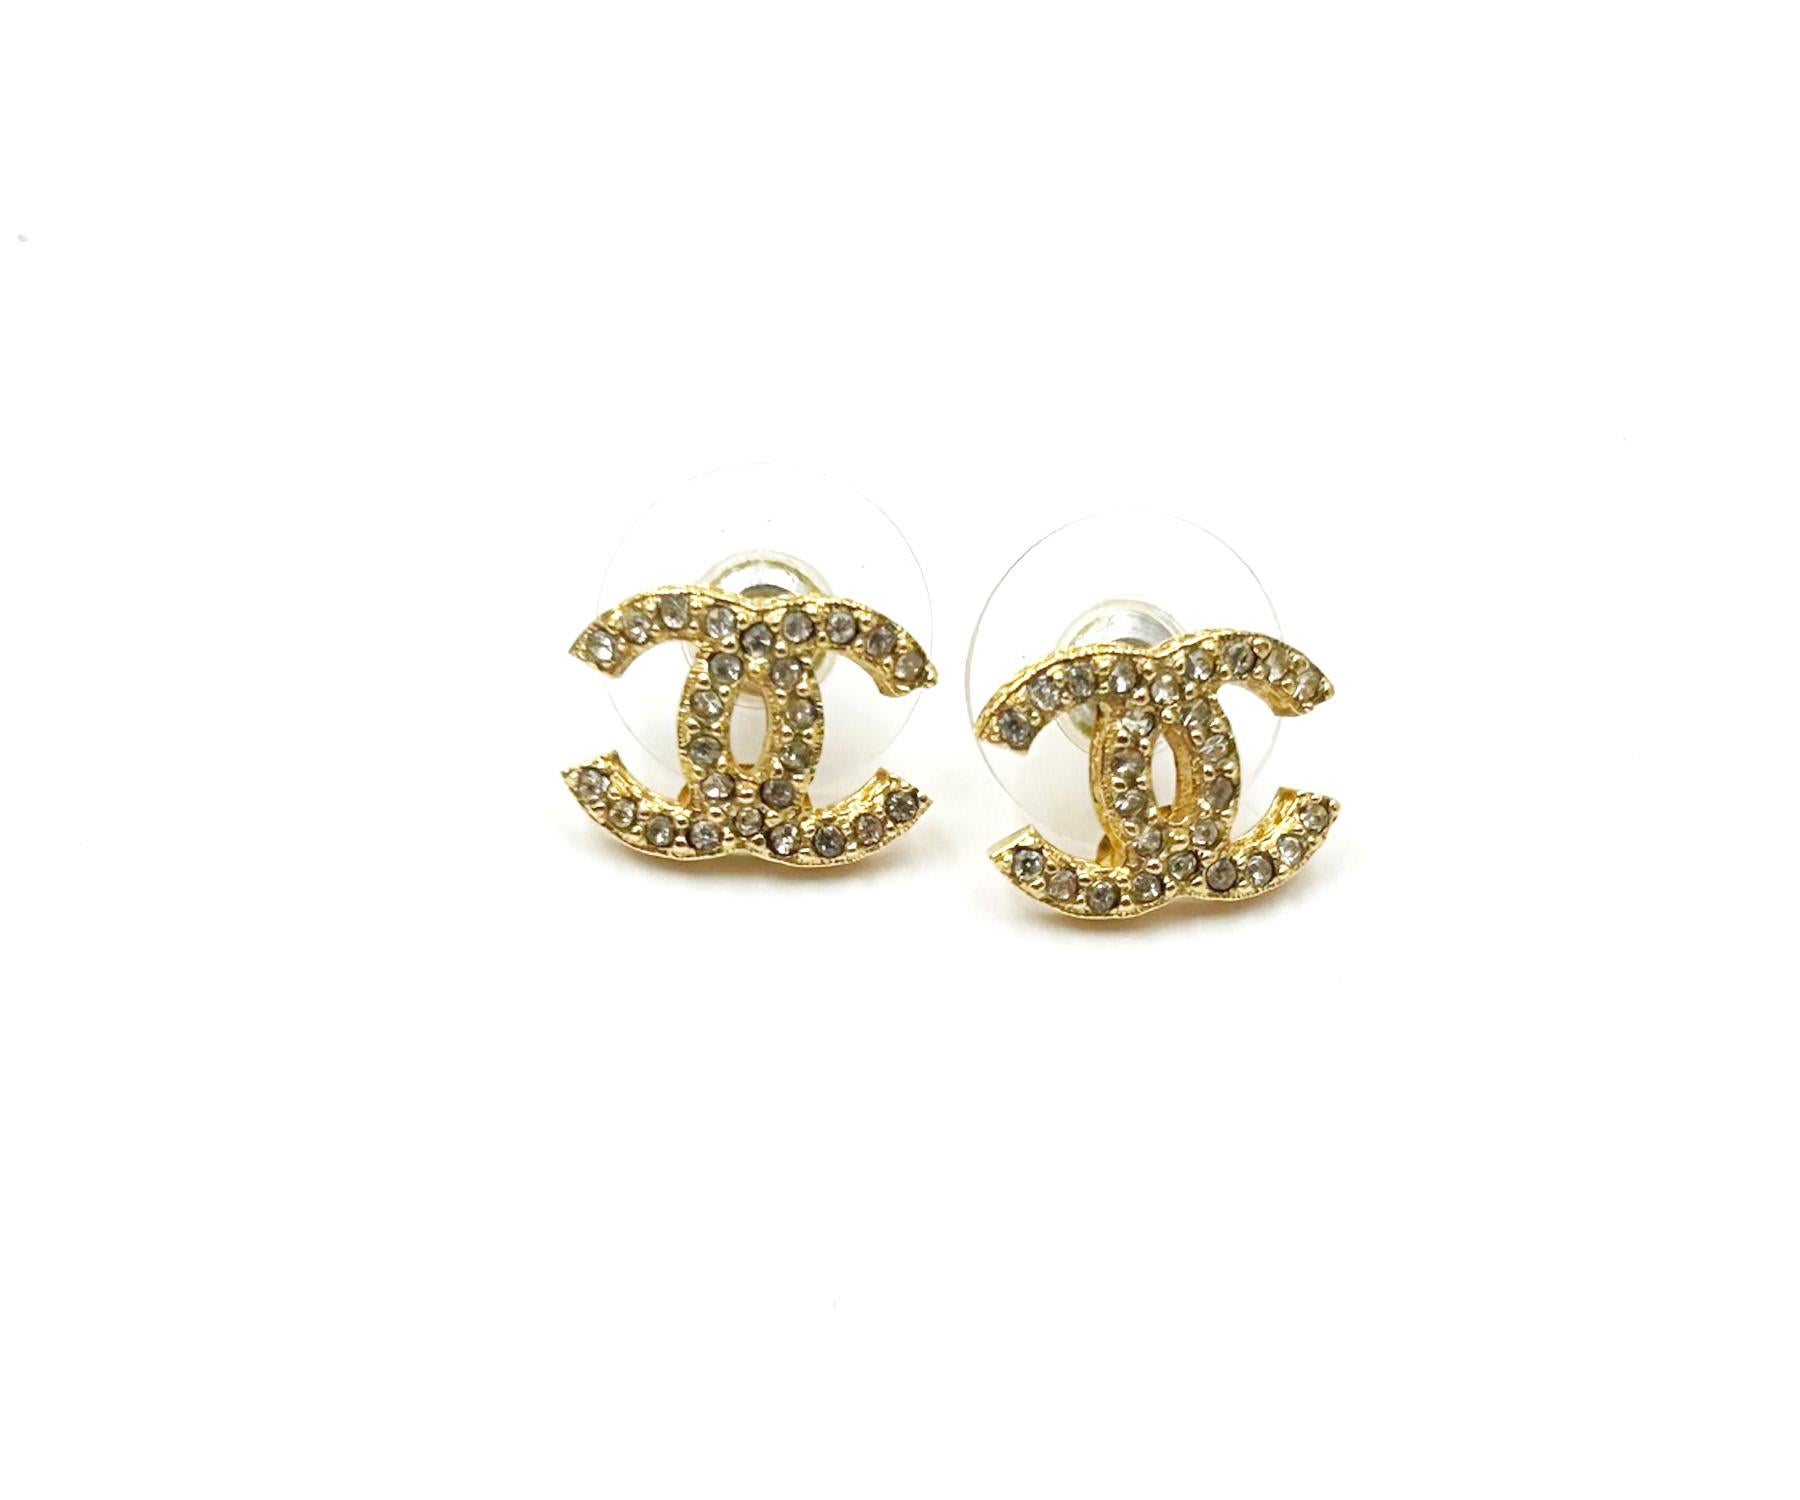 Chanel Classic  Gold Plated CC Crystal Small Curve Piercing Earrings

*Marked 15
*Made in Italy

-It is approximately 0.5